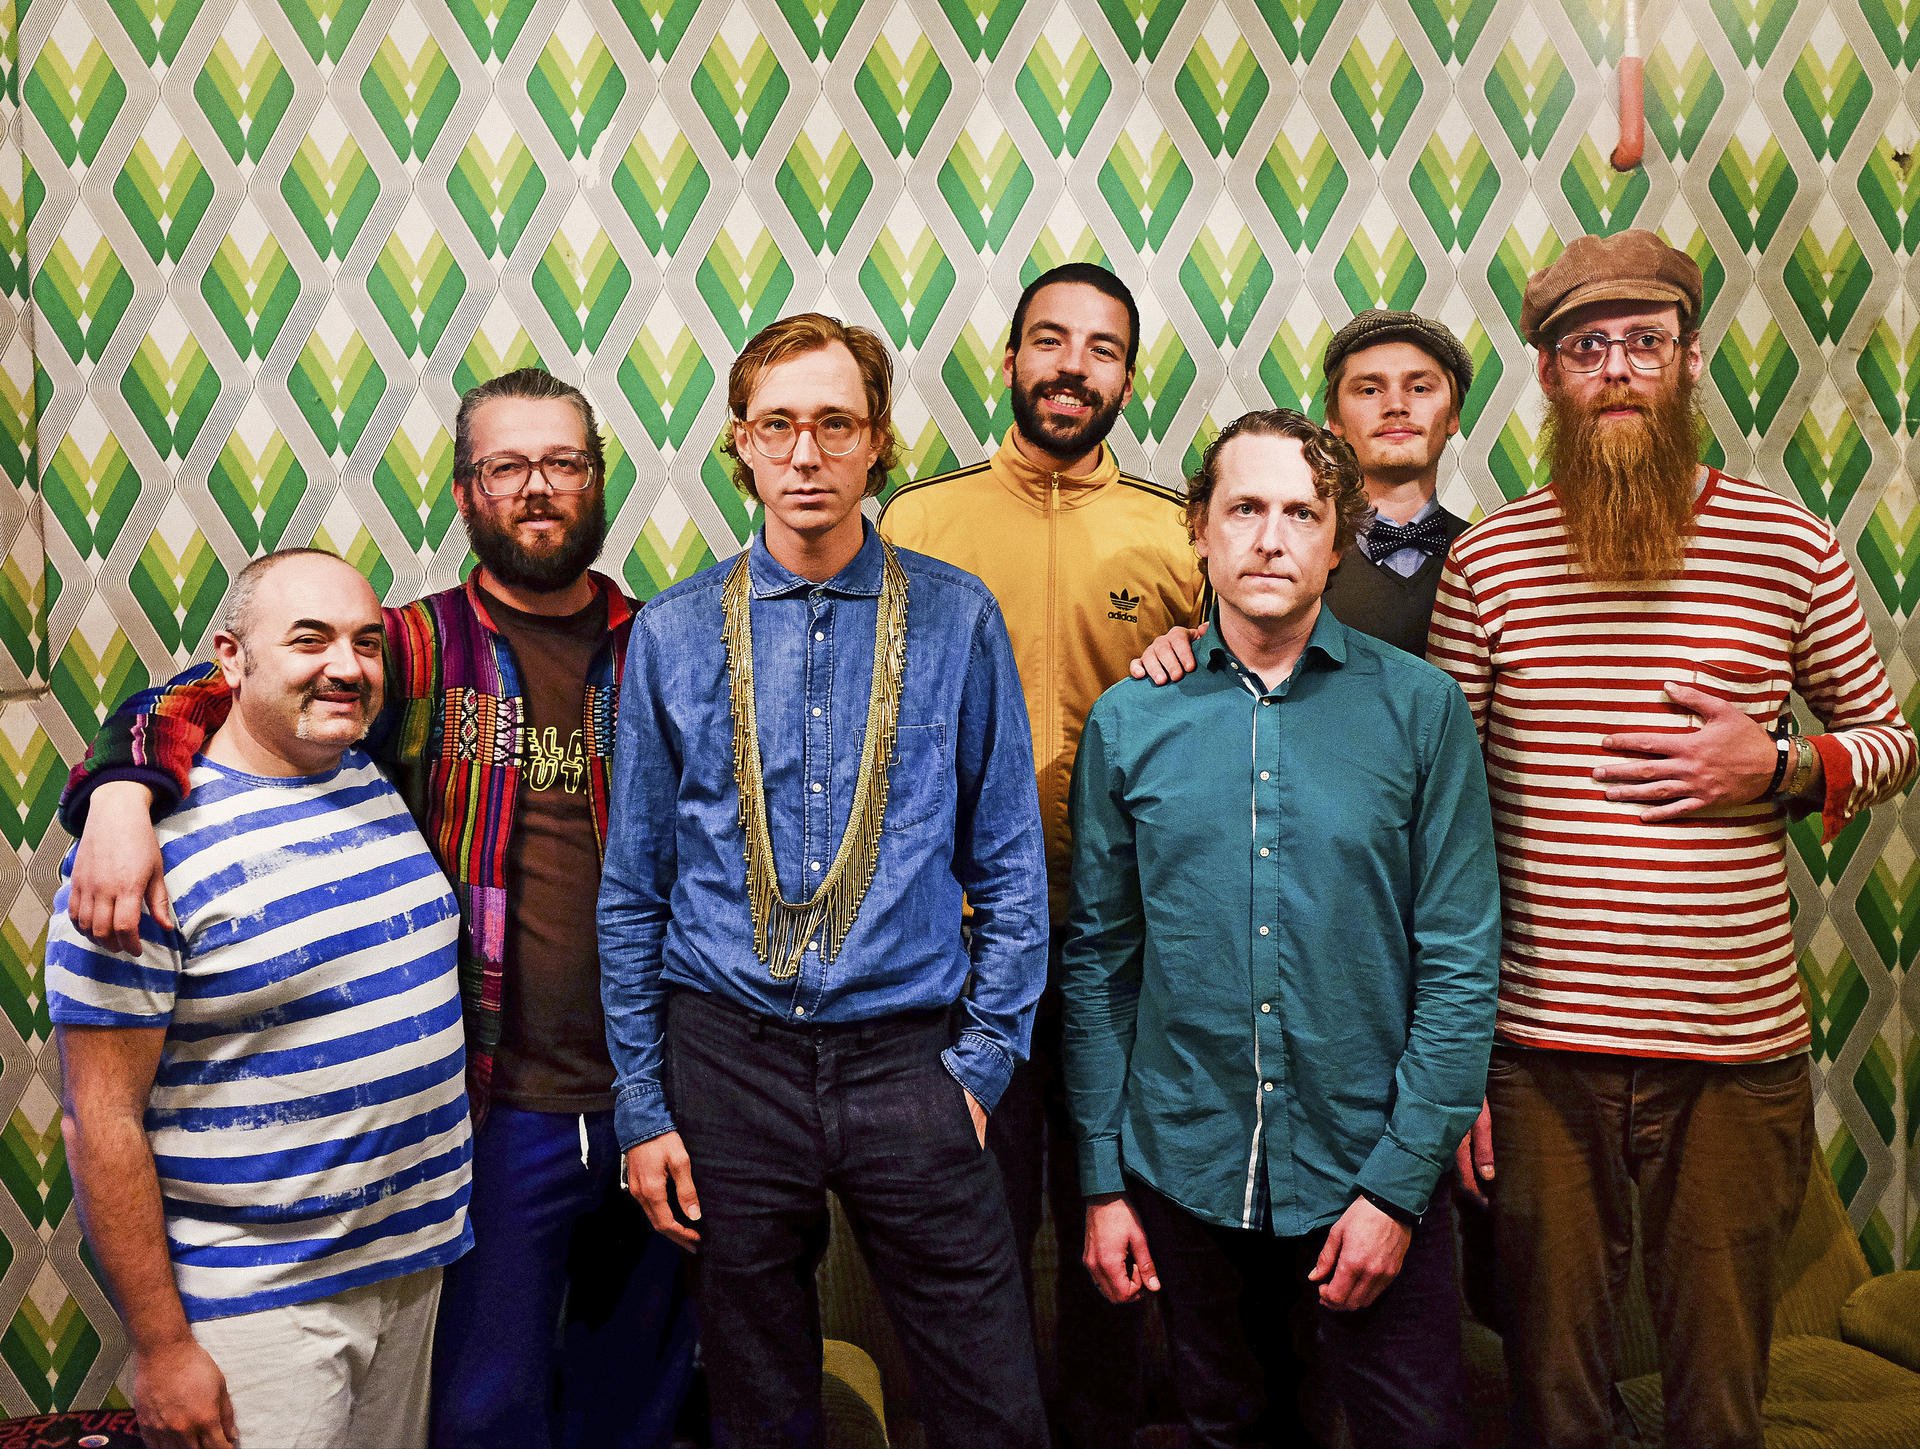 Erlend Øye (third from left) with touring band The Rainbows. Photo: Jenne Grabowski